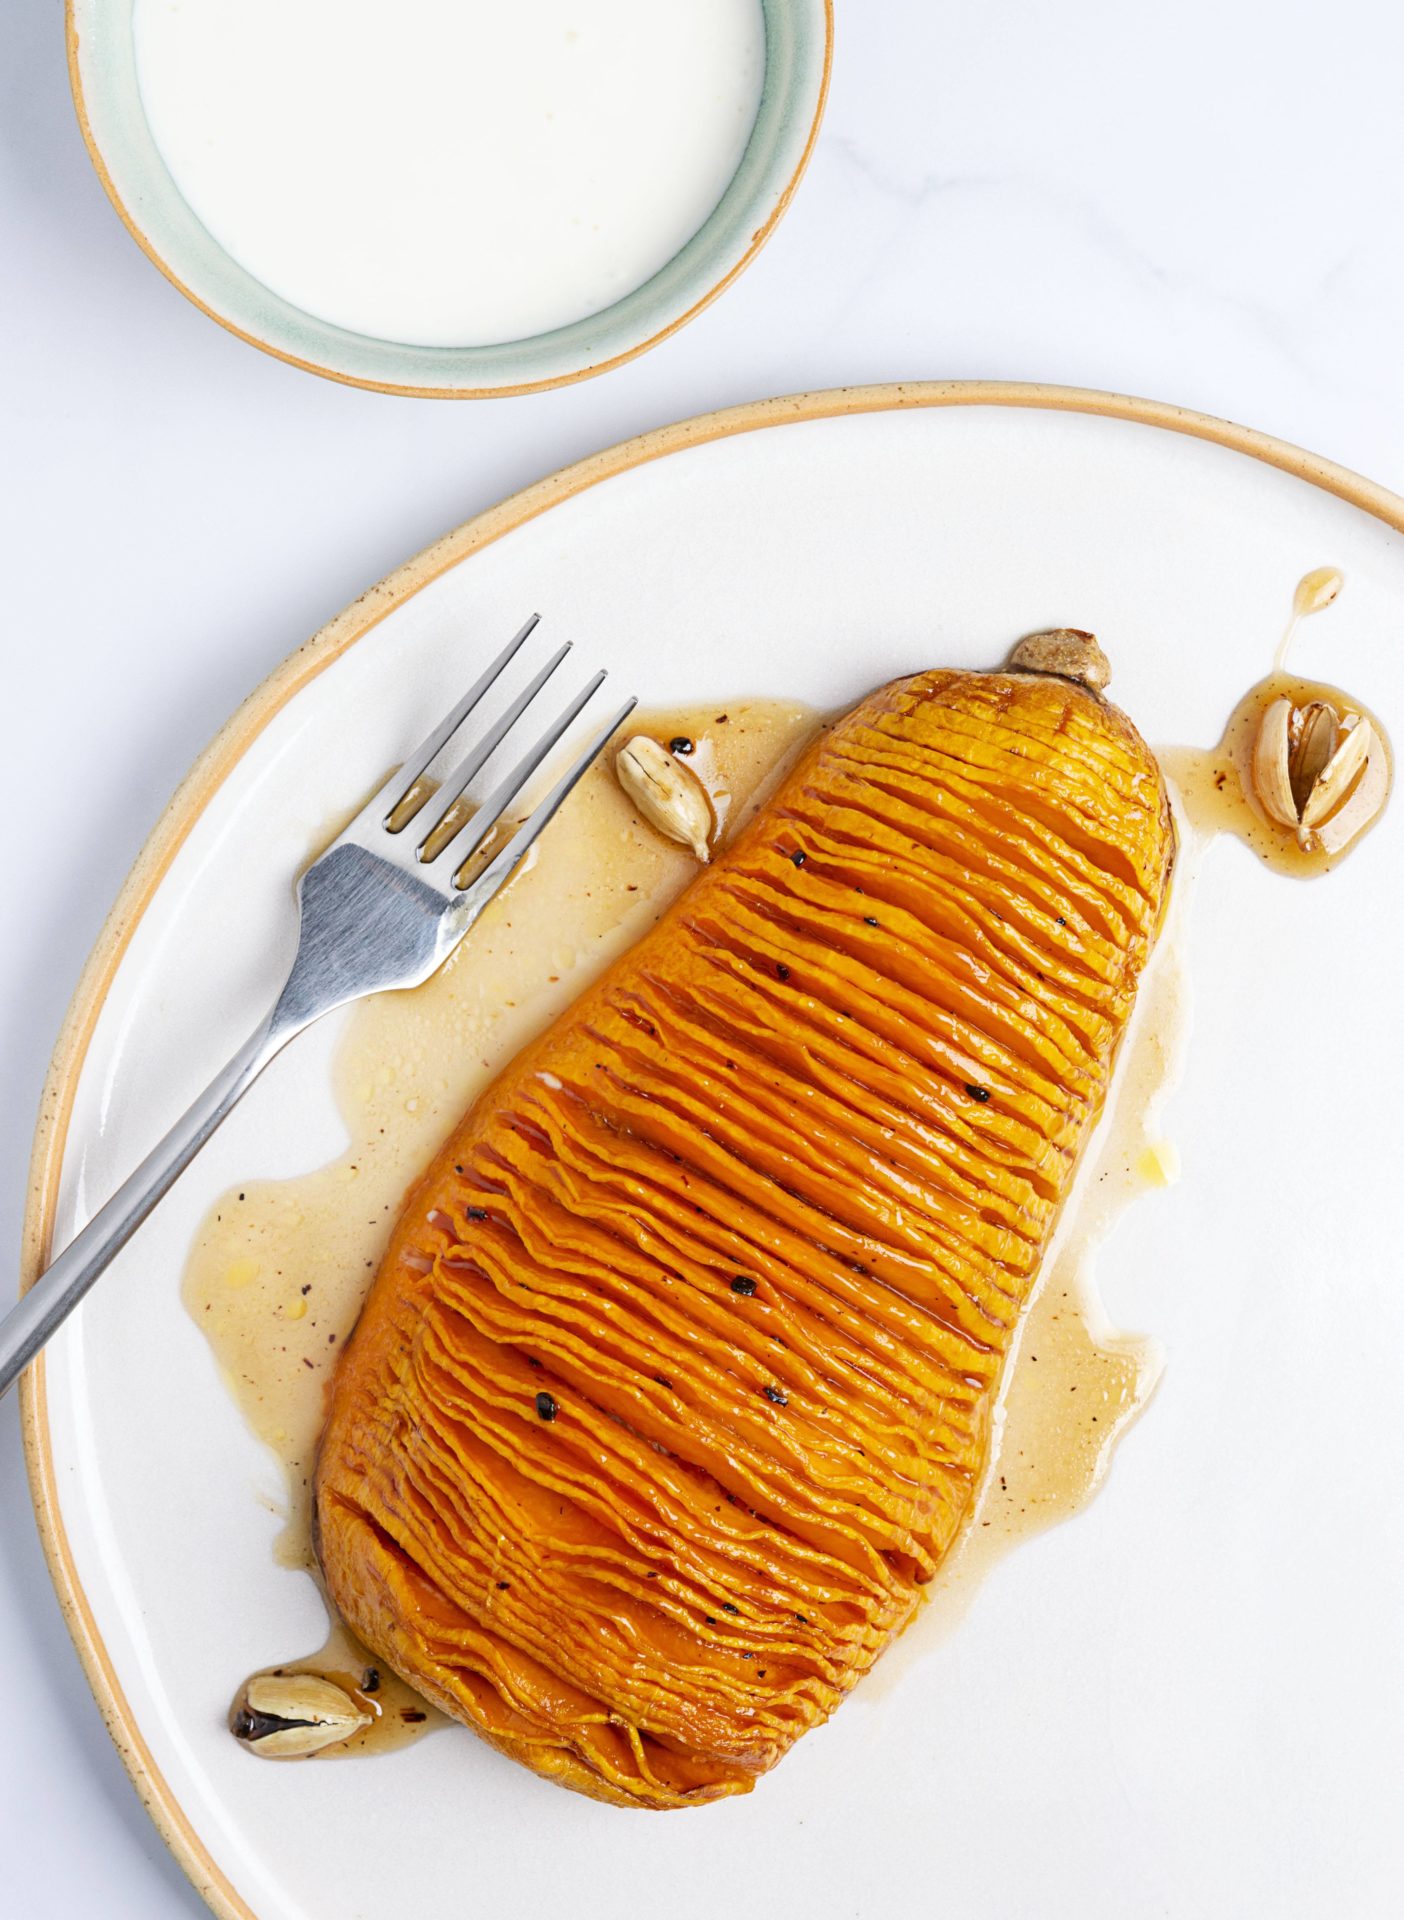 Butternut squash how to make hasselback vegetables easy healthy recipes